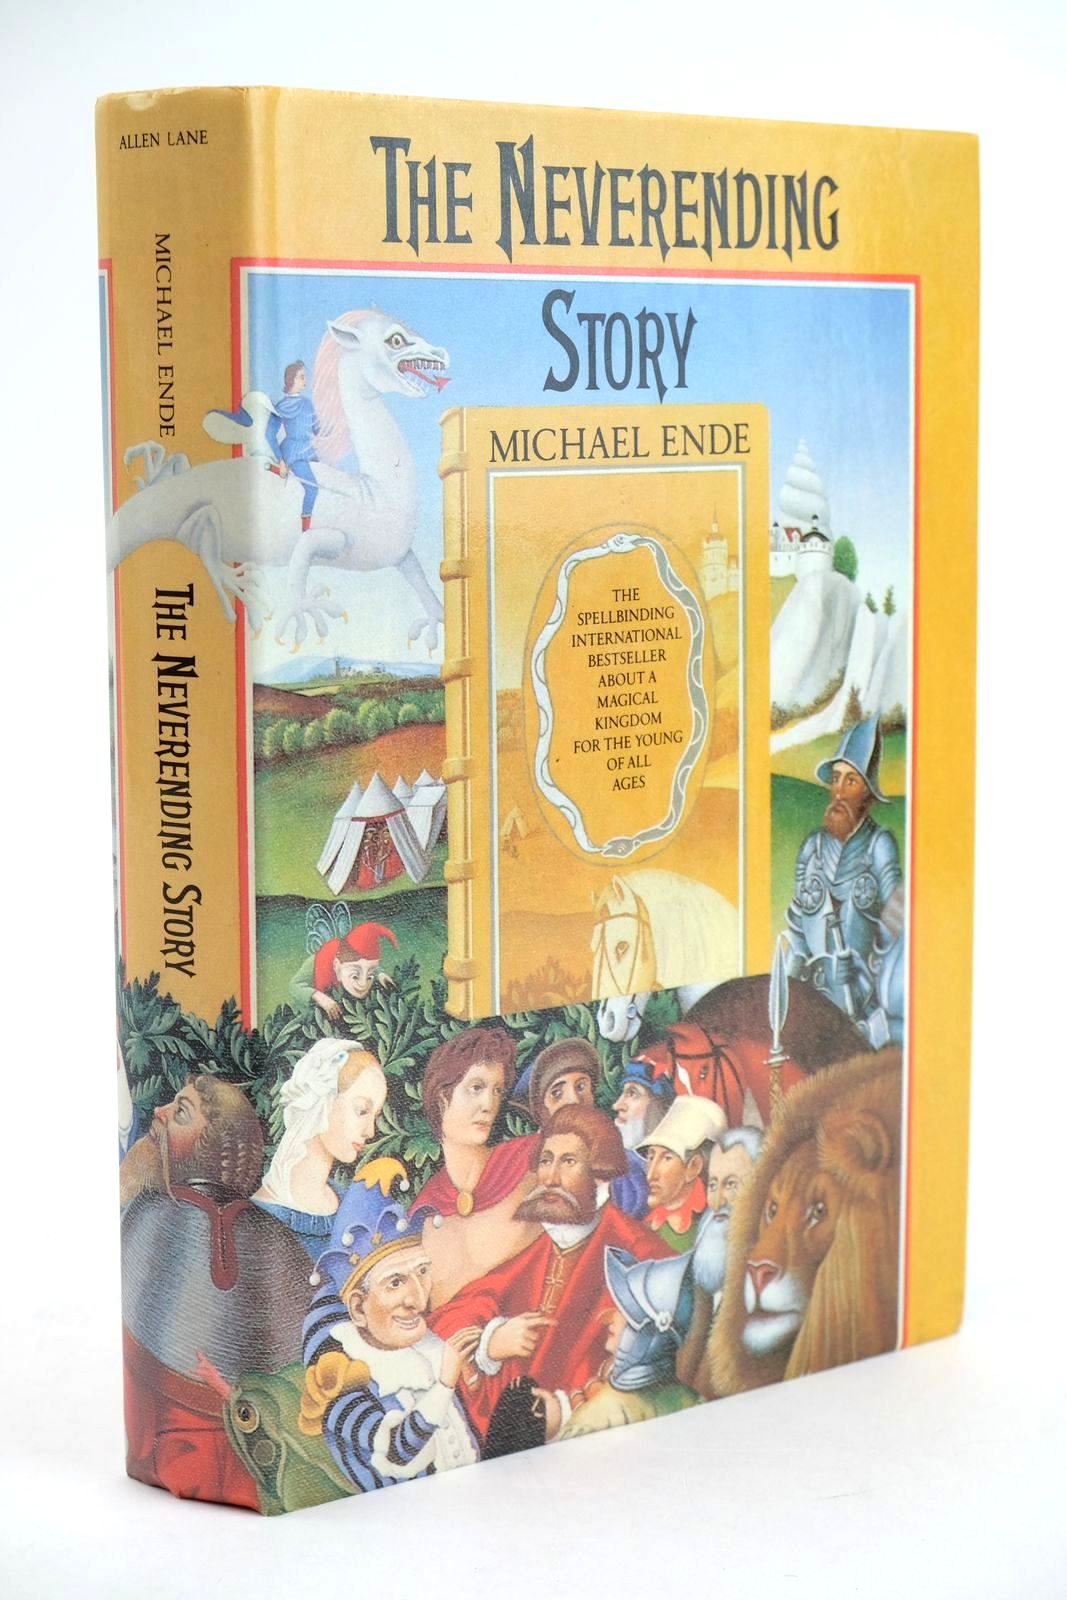 Photo of THE NEVERENDING STORY written by Ende, Michael illustrated by Quadflieg, Roswitha published by Allen Lane (STOCK CODE: 1323979)  for sale by Stella & Rose's Books